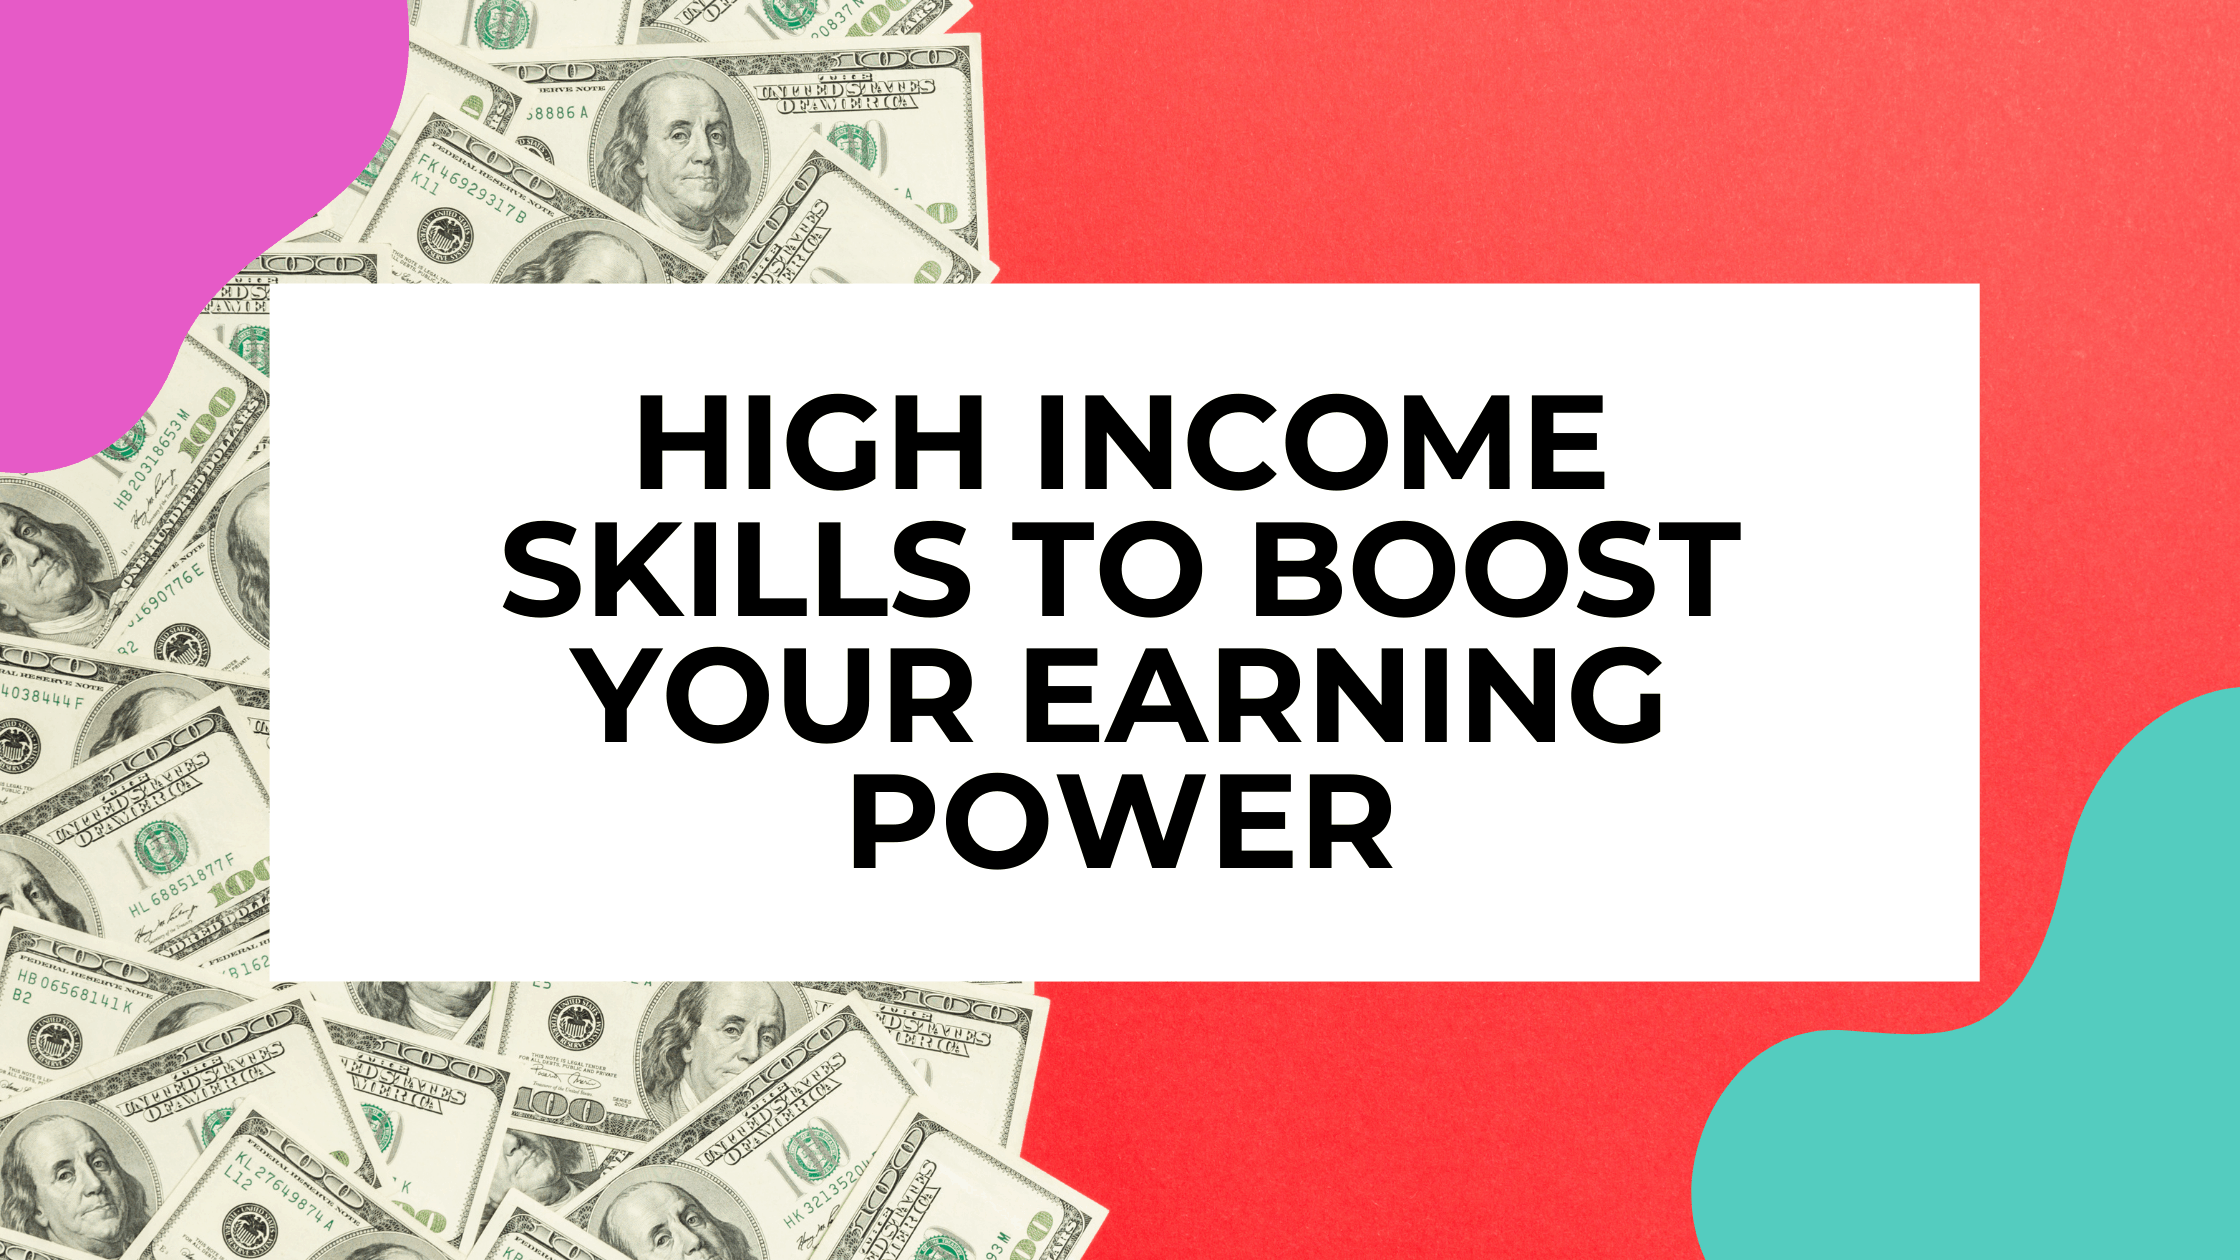 14 High Skills to Build Your Earning Power